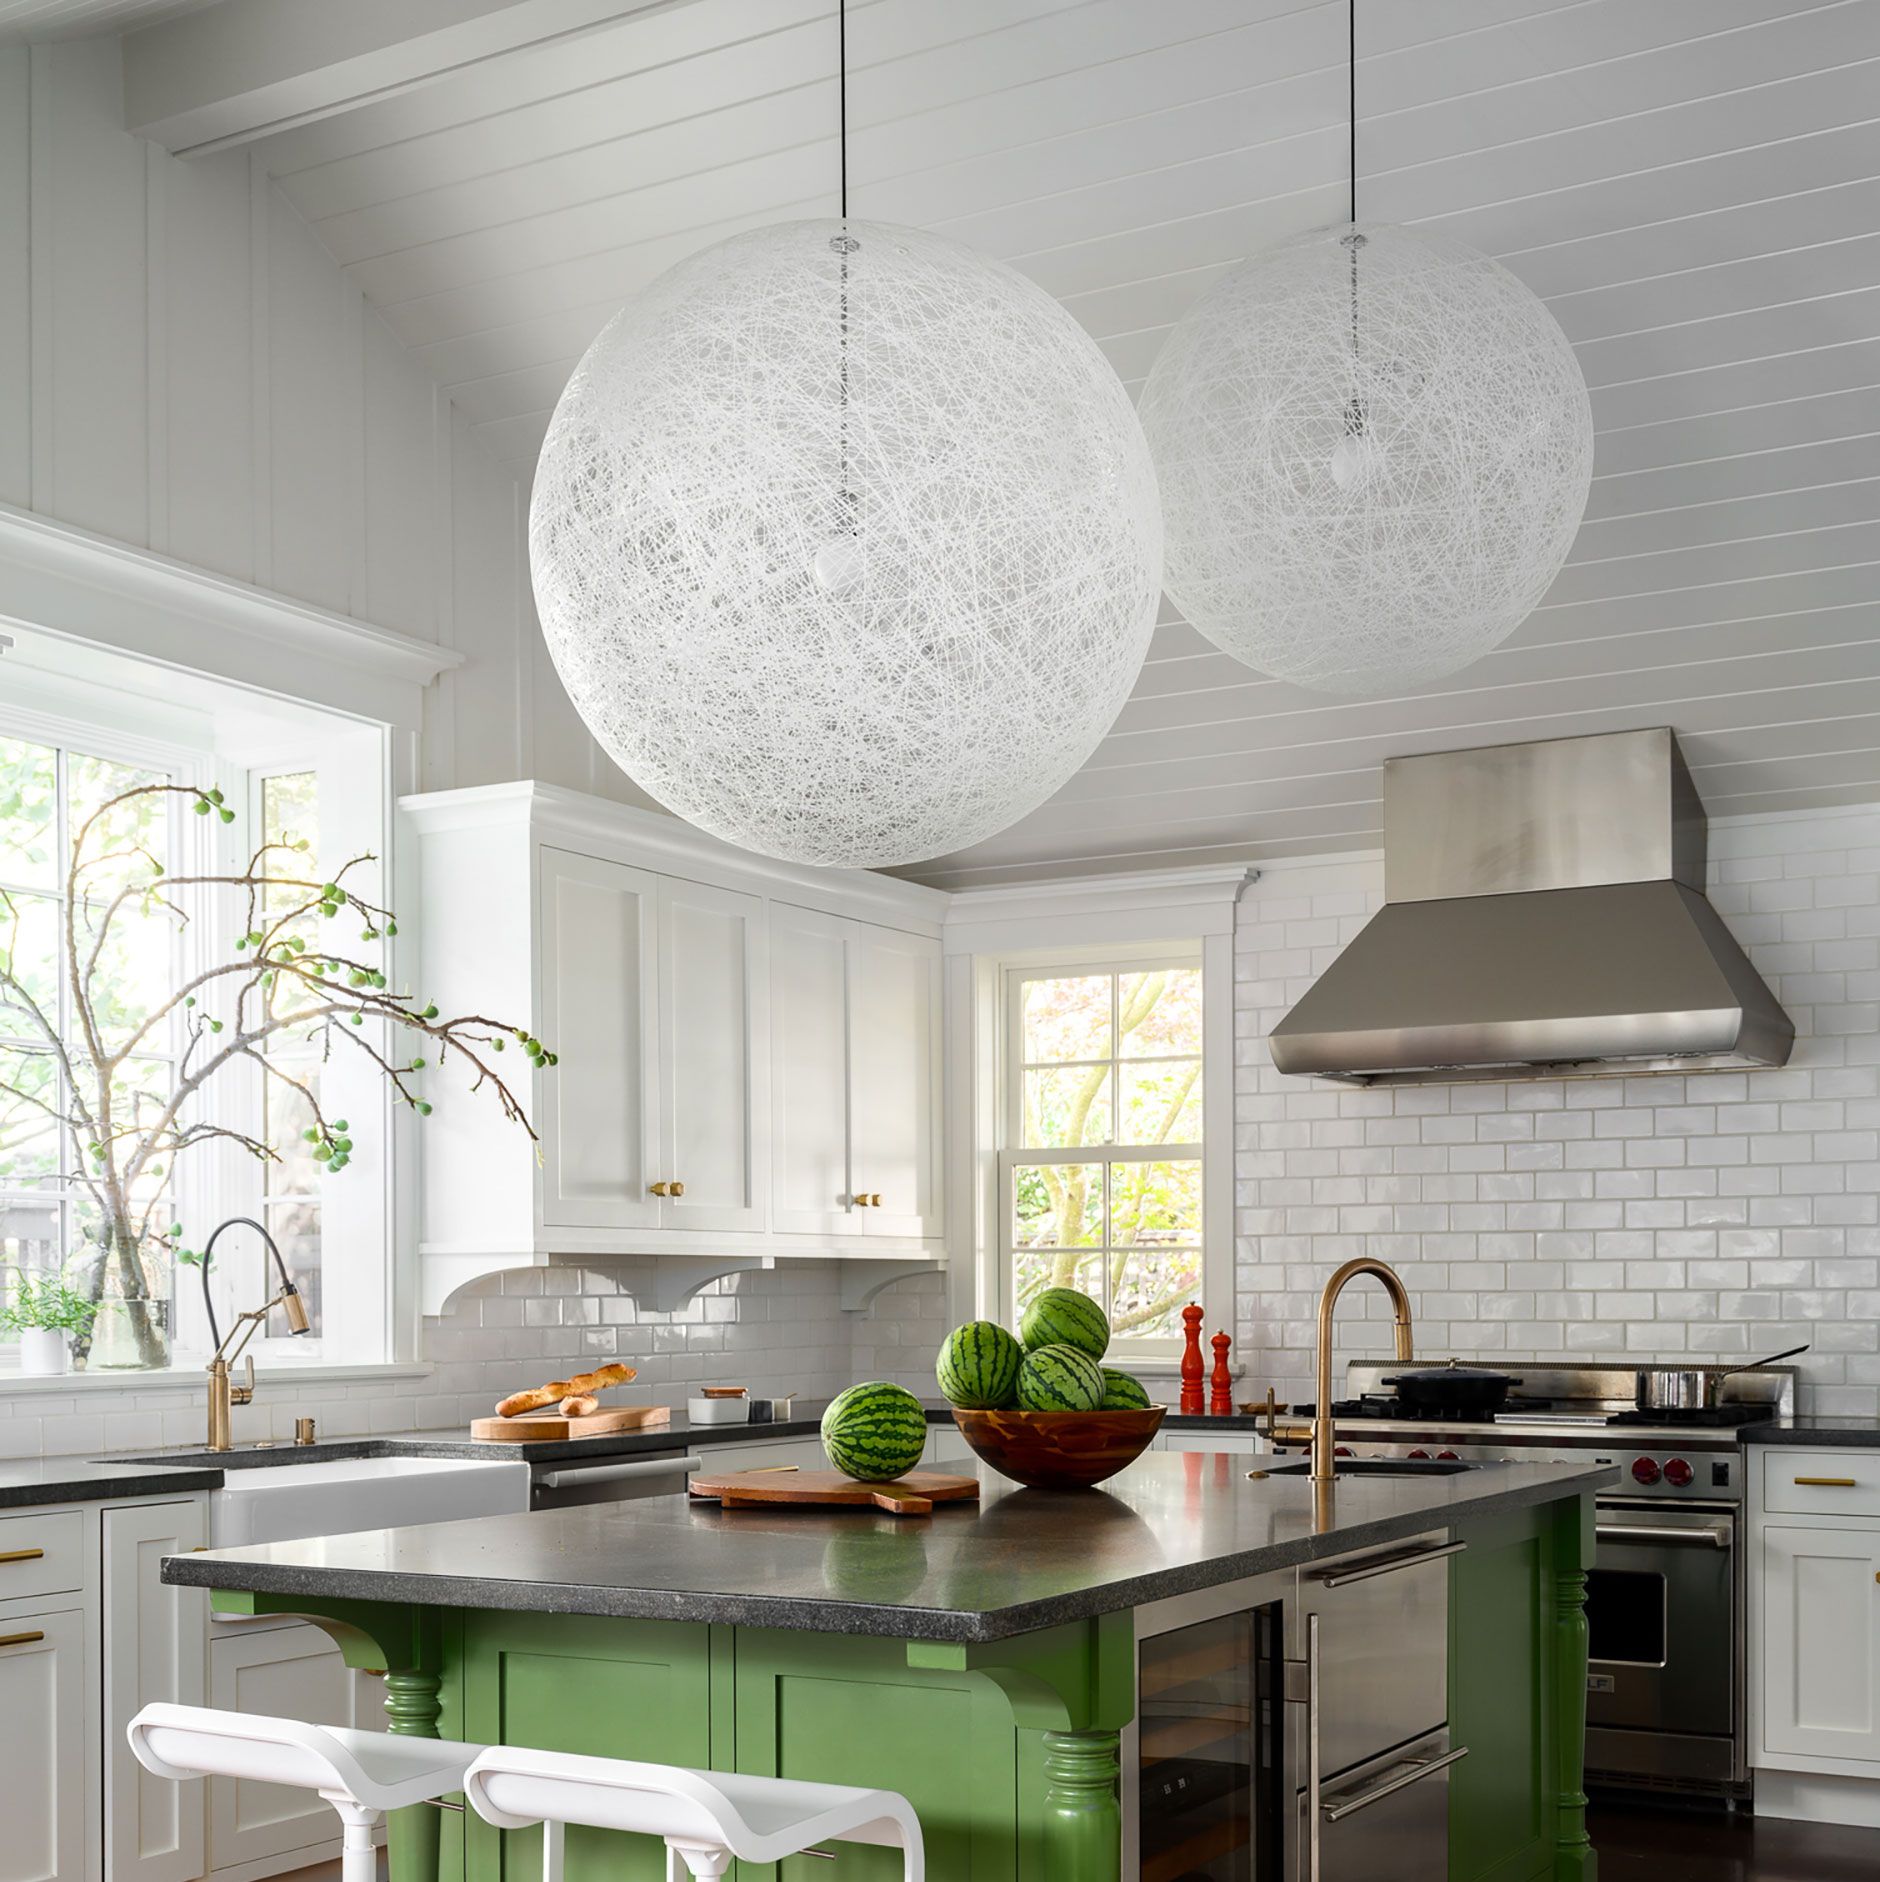 painted white kitchen cabinets ideas